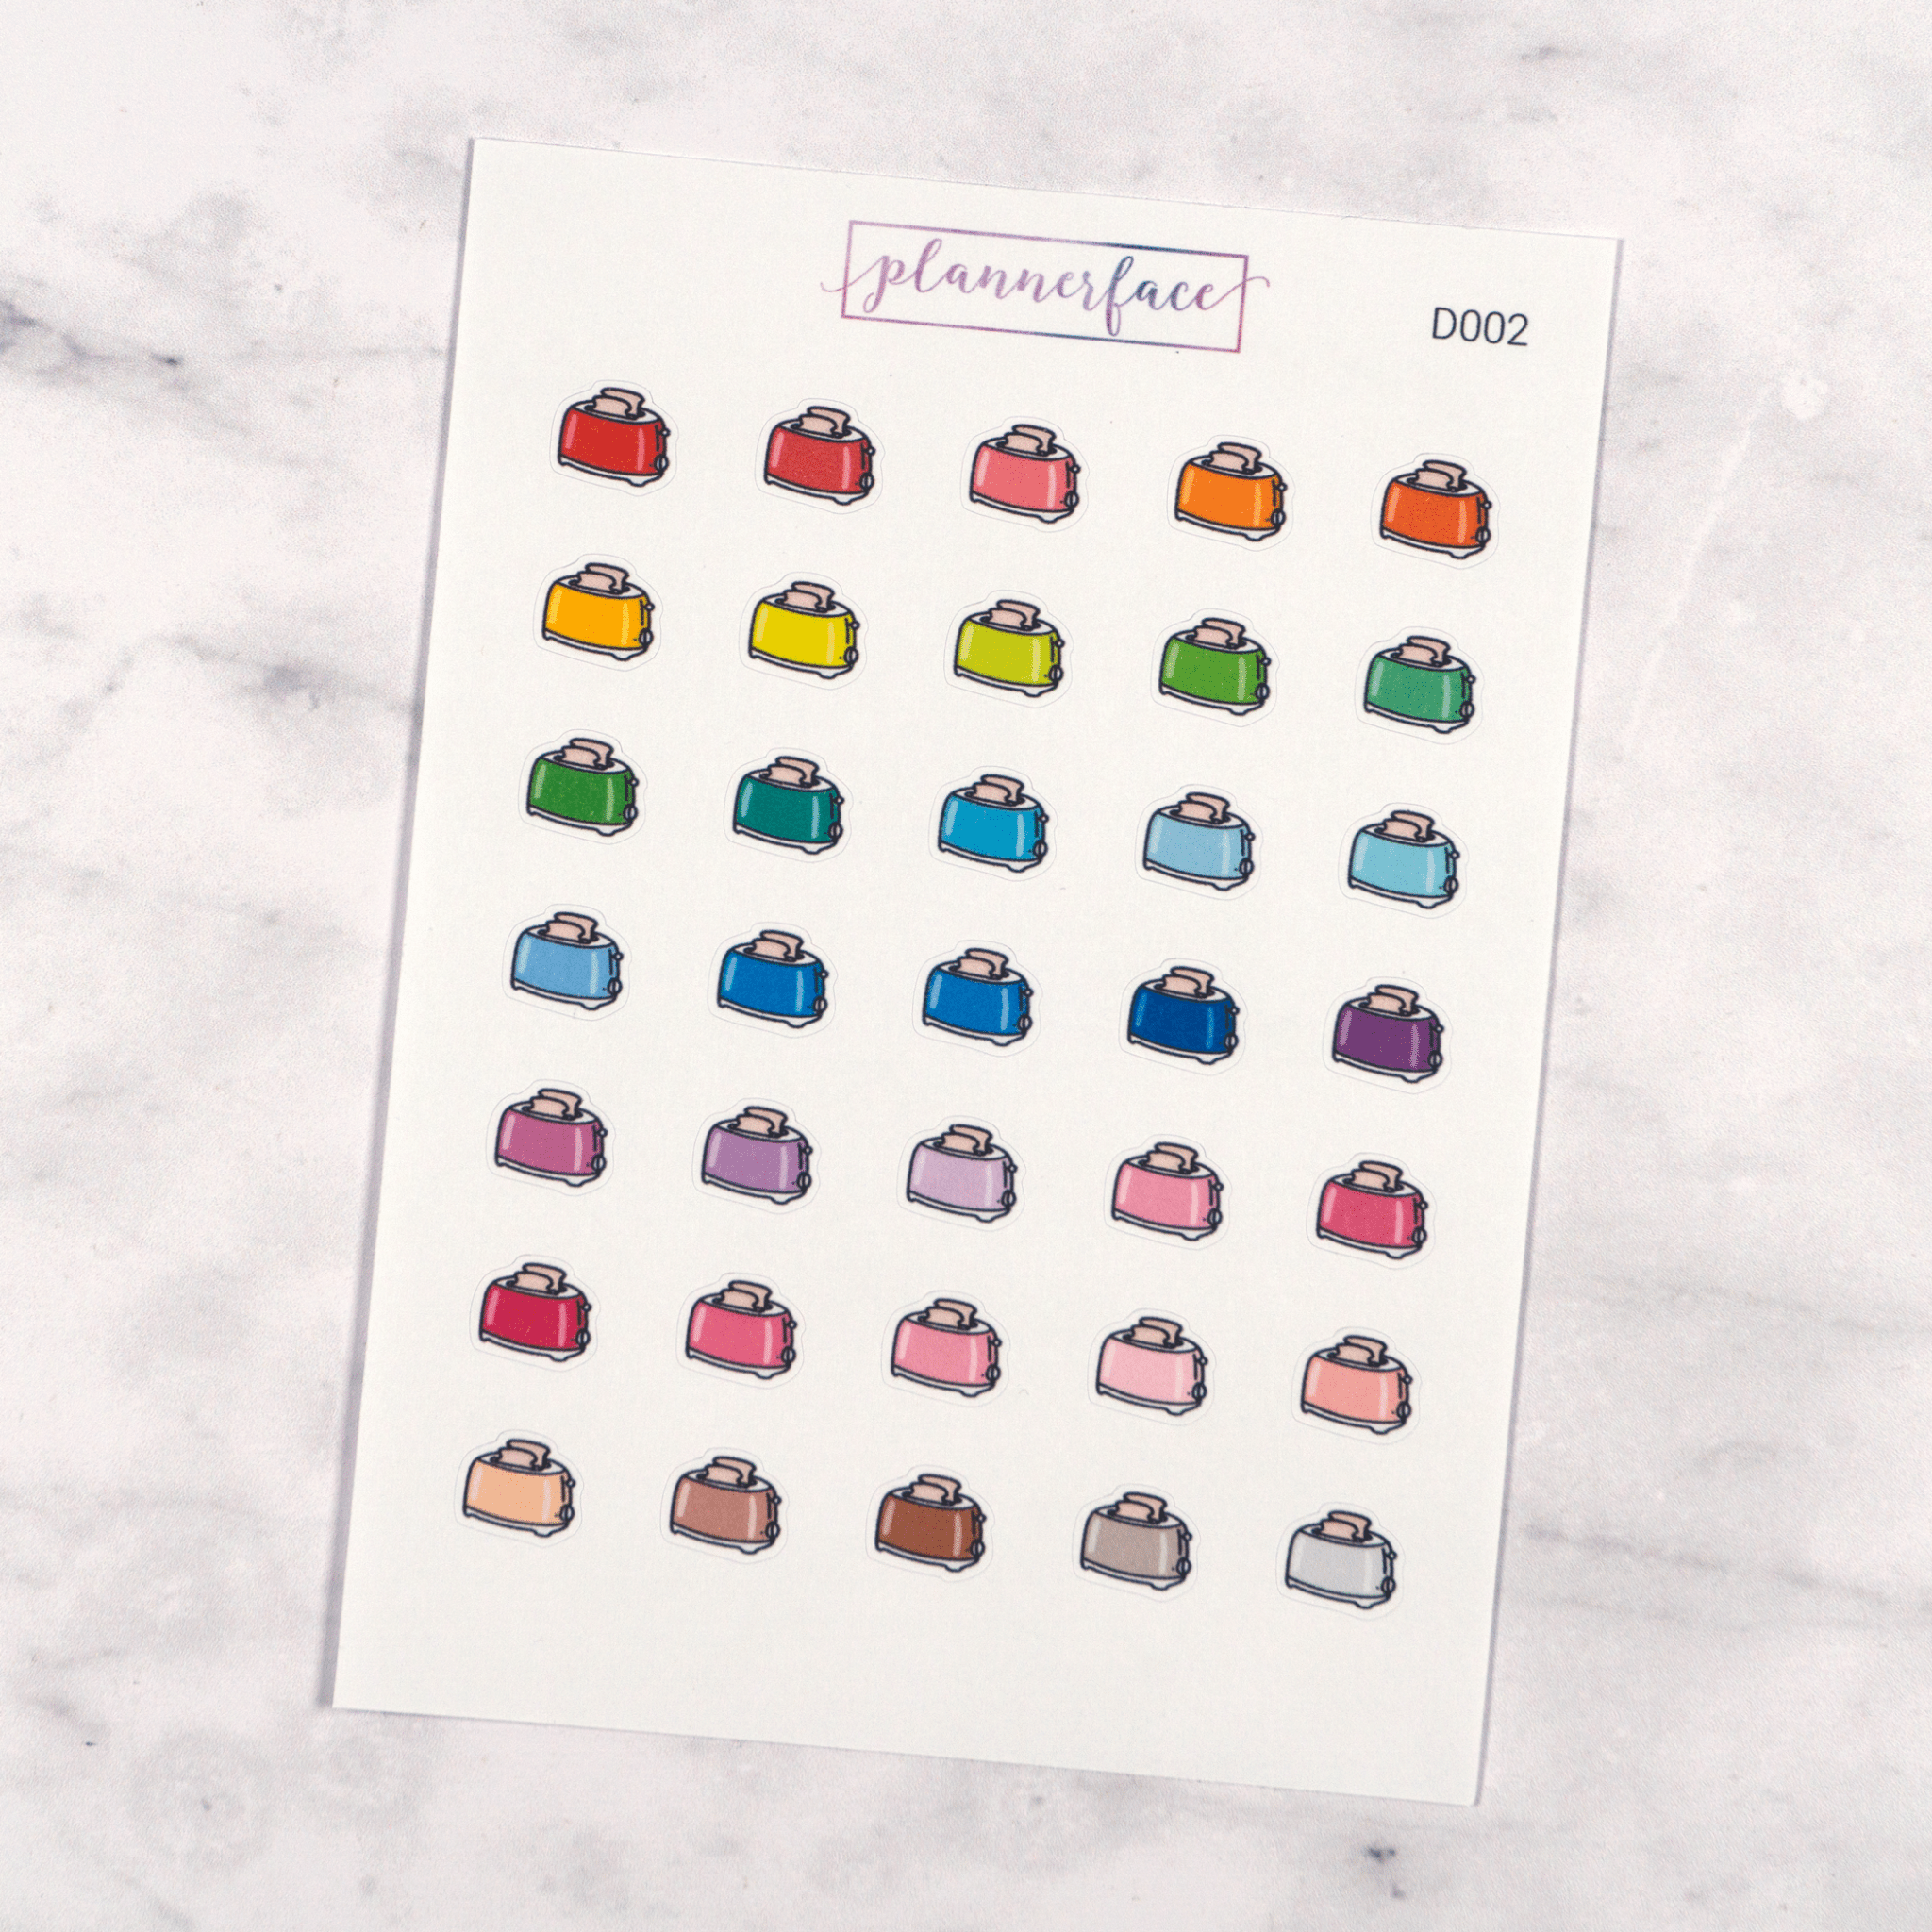 Toaster Multicolour Doodles by Plannerface